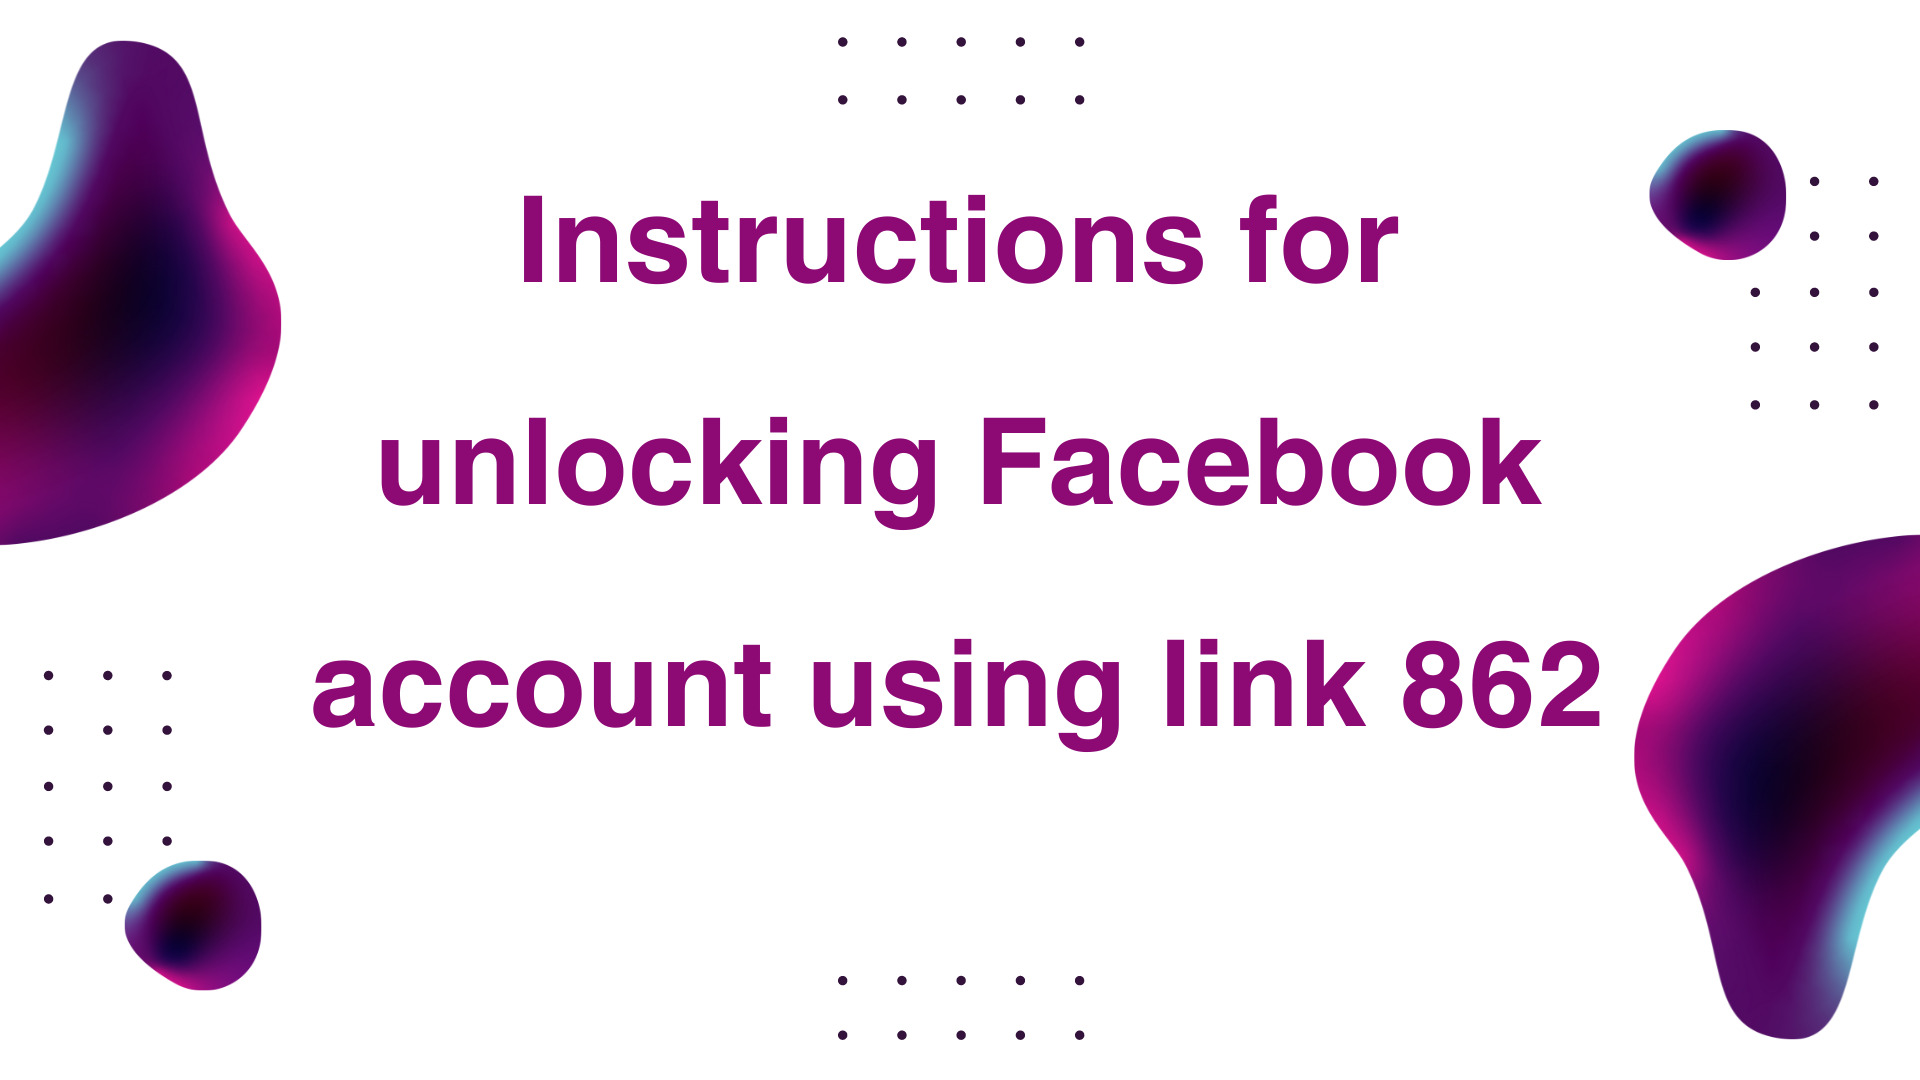 Instructions for unlocking Facebook account using link 862